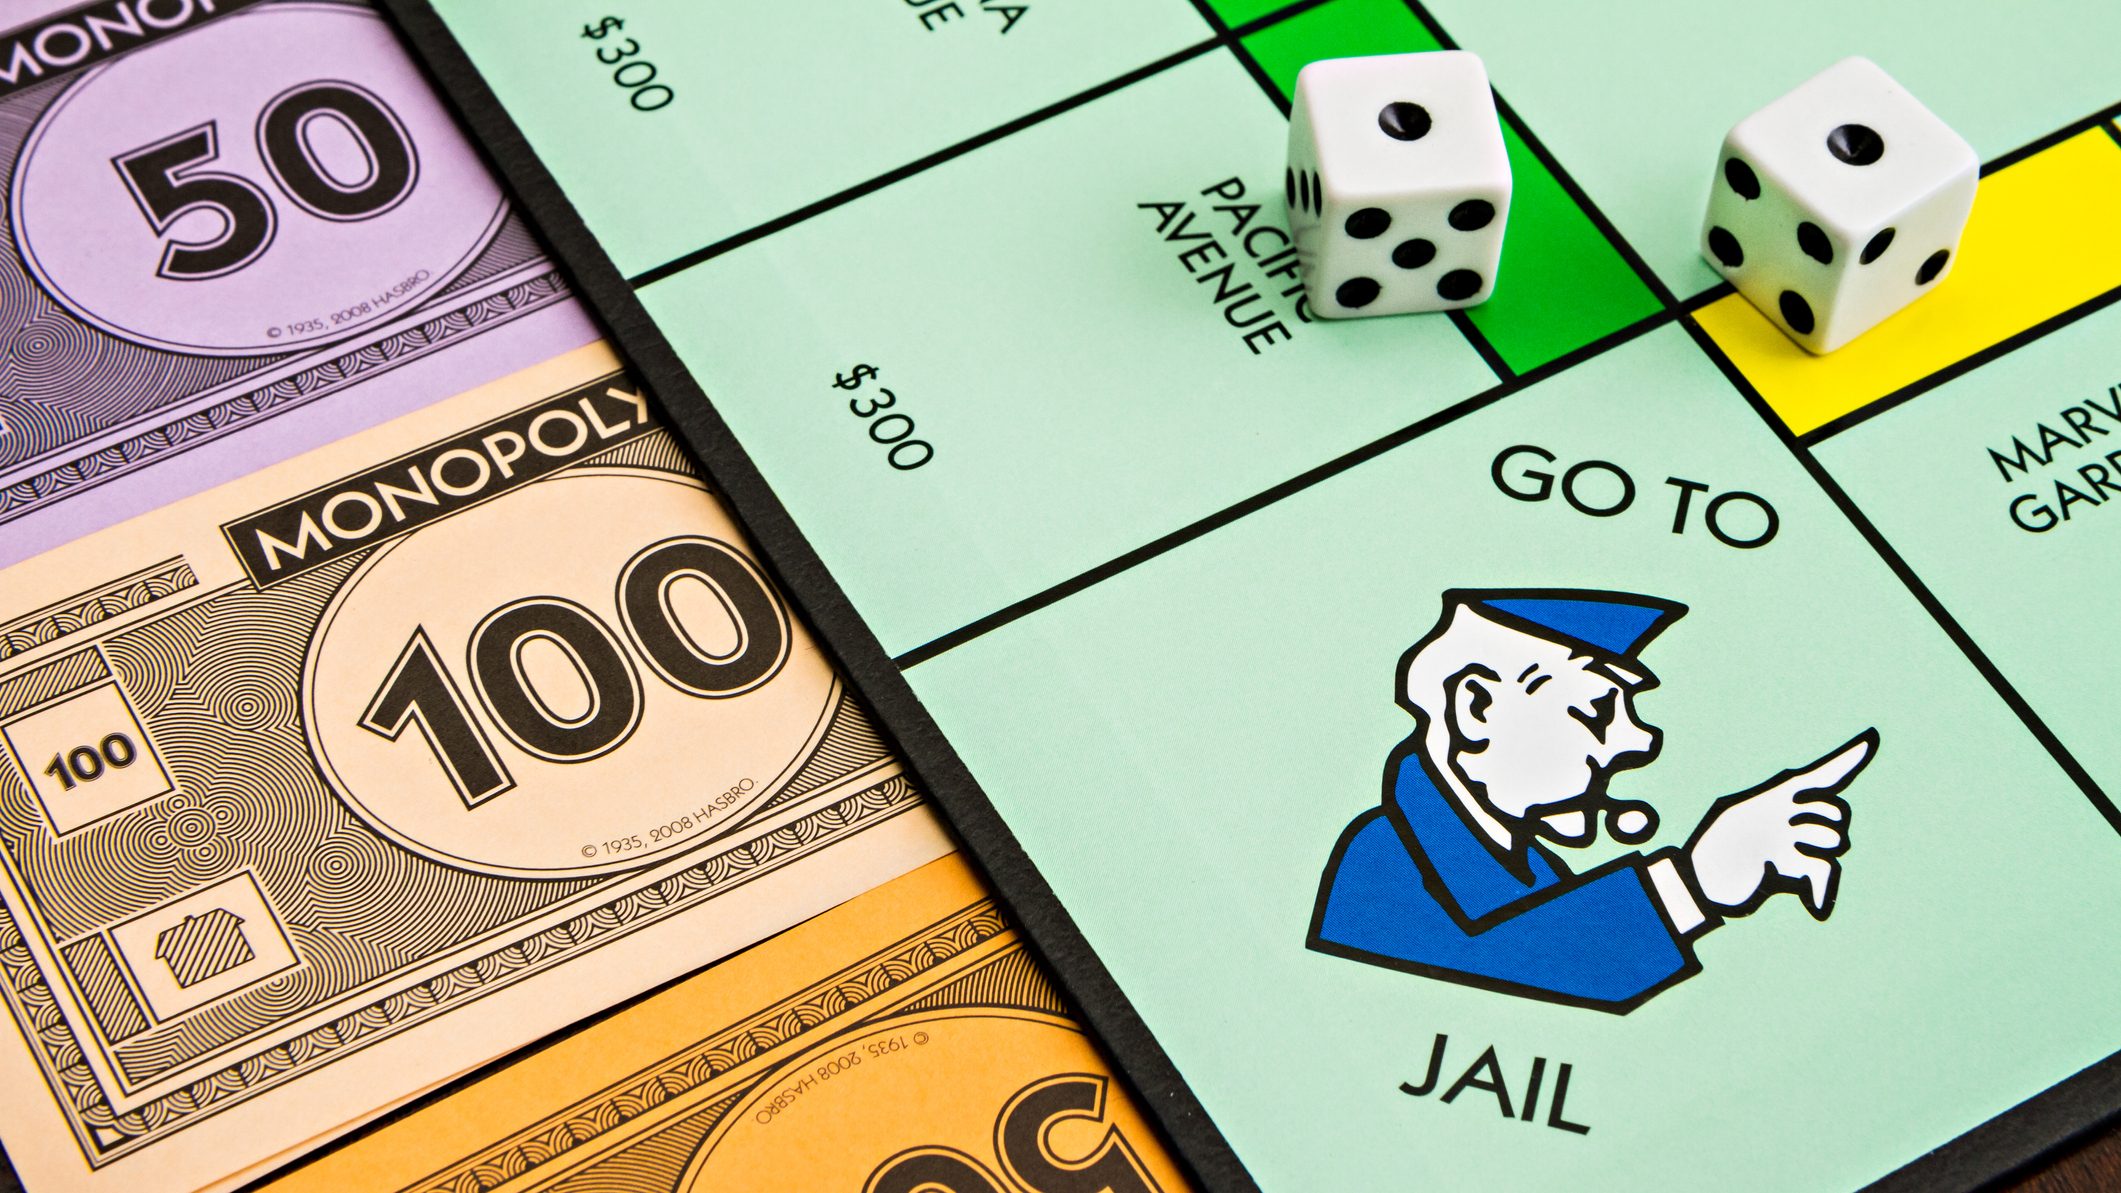 Monopoly Go! is a rather ruthless take on the classic board game